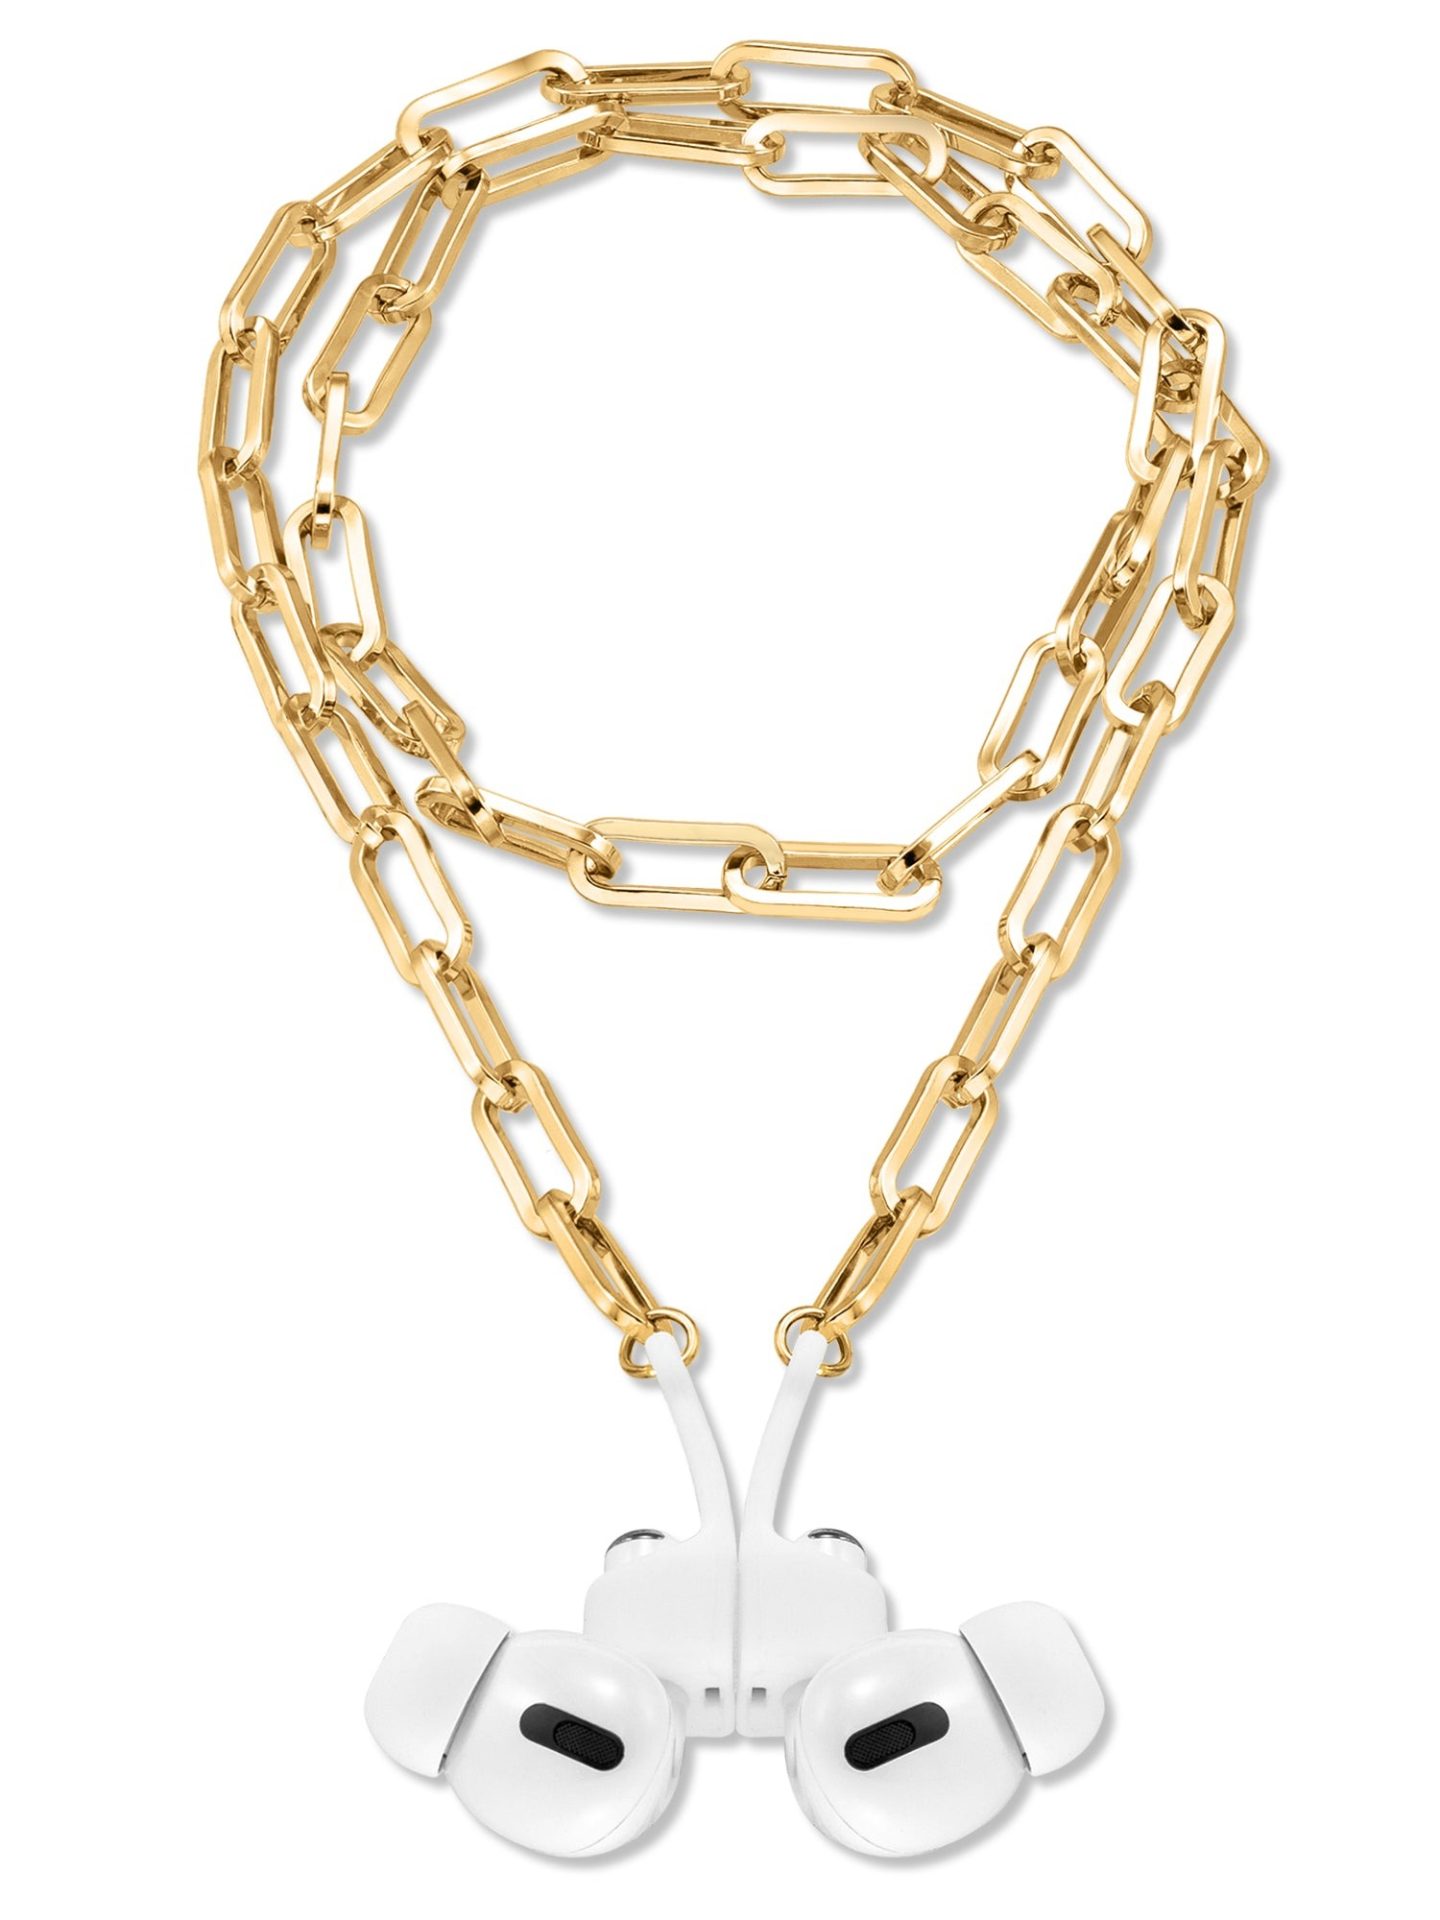 WITHit chain link necklace